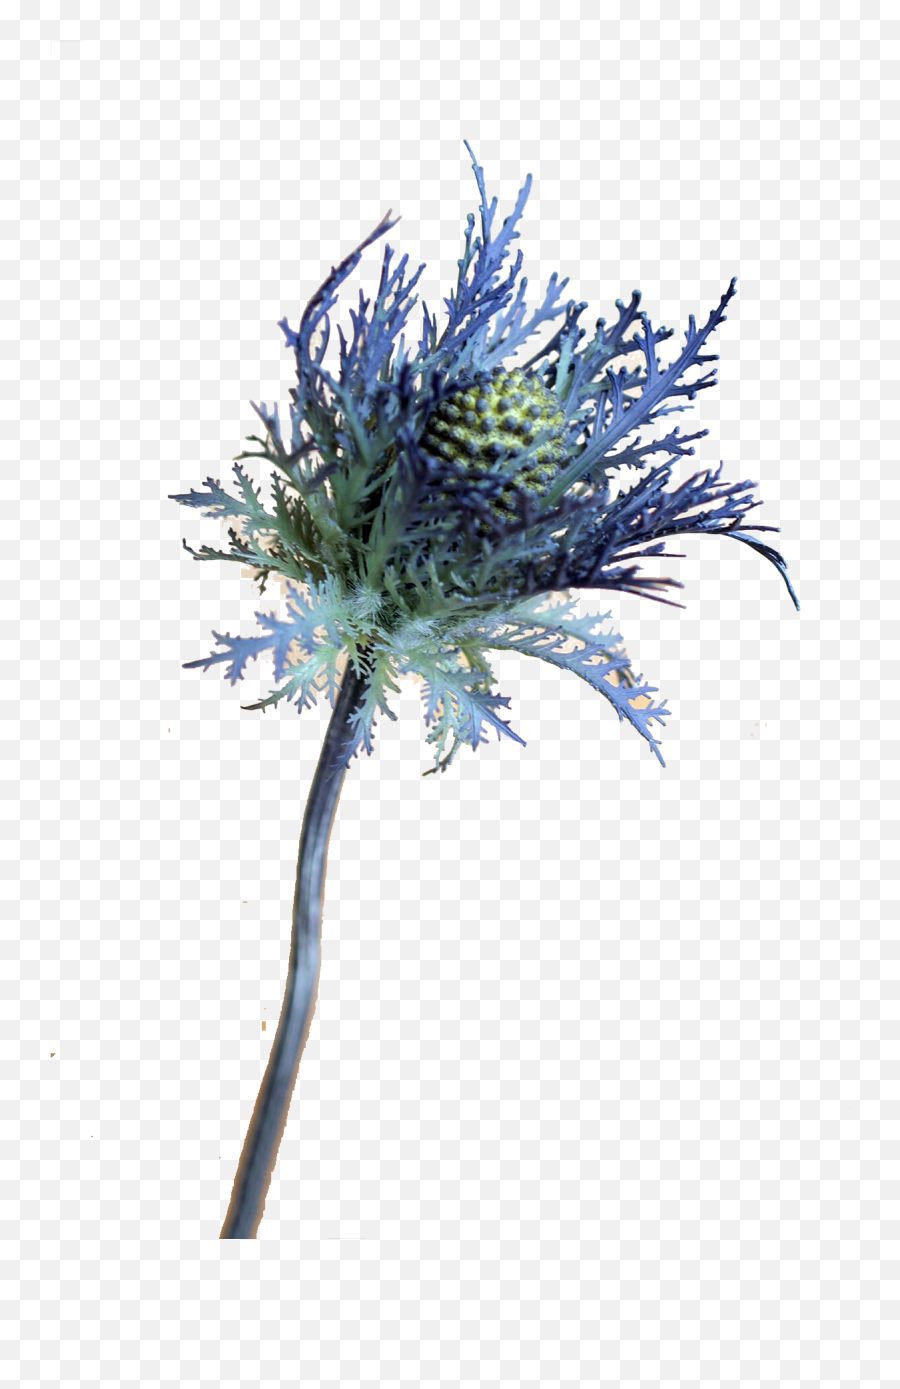 Blue Thistle Flowers Png Free Download